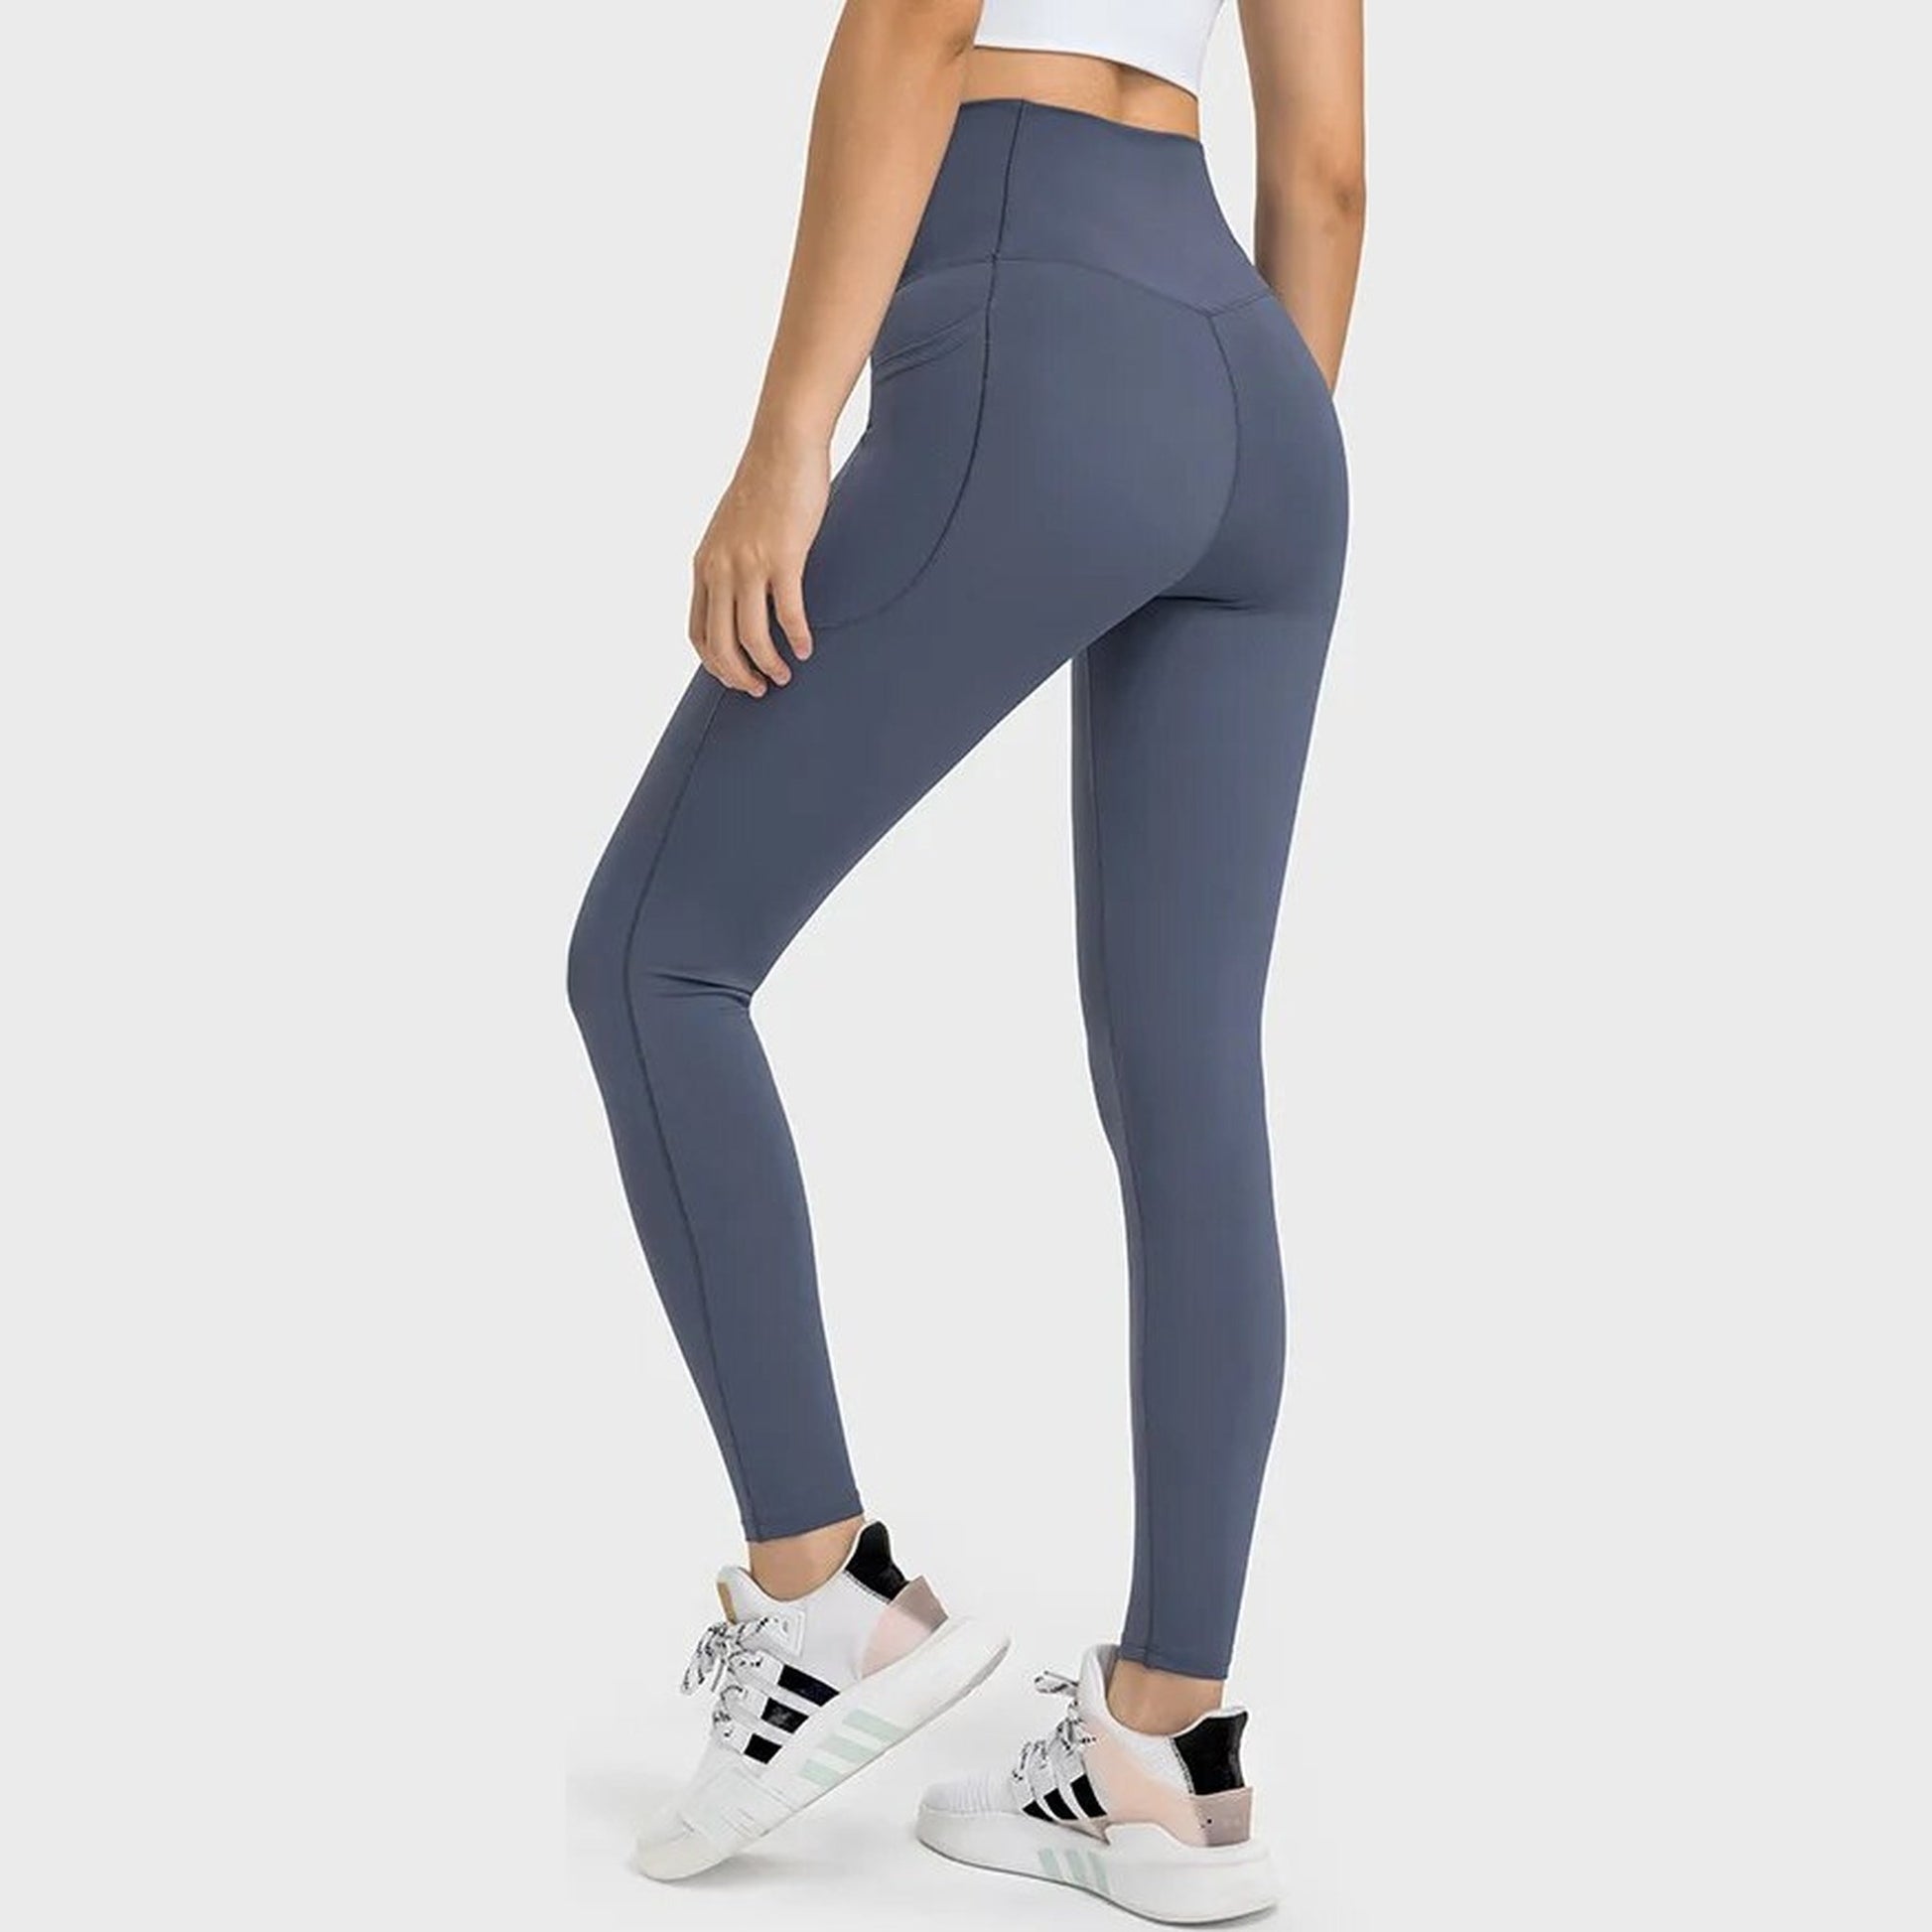 High-Waist Velocity Anti-Camel Toe Workout Leggings With Pockets